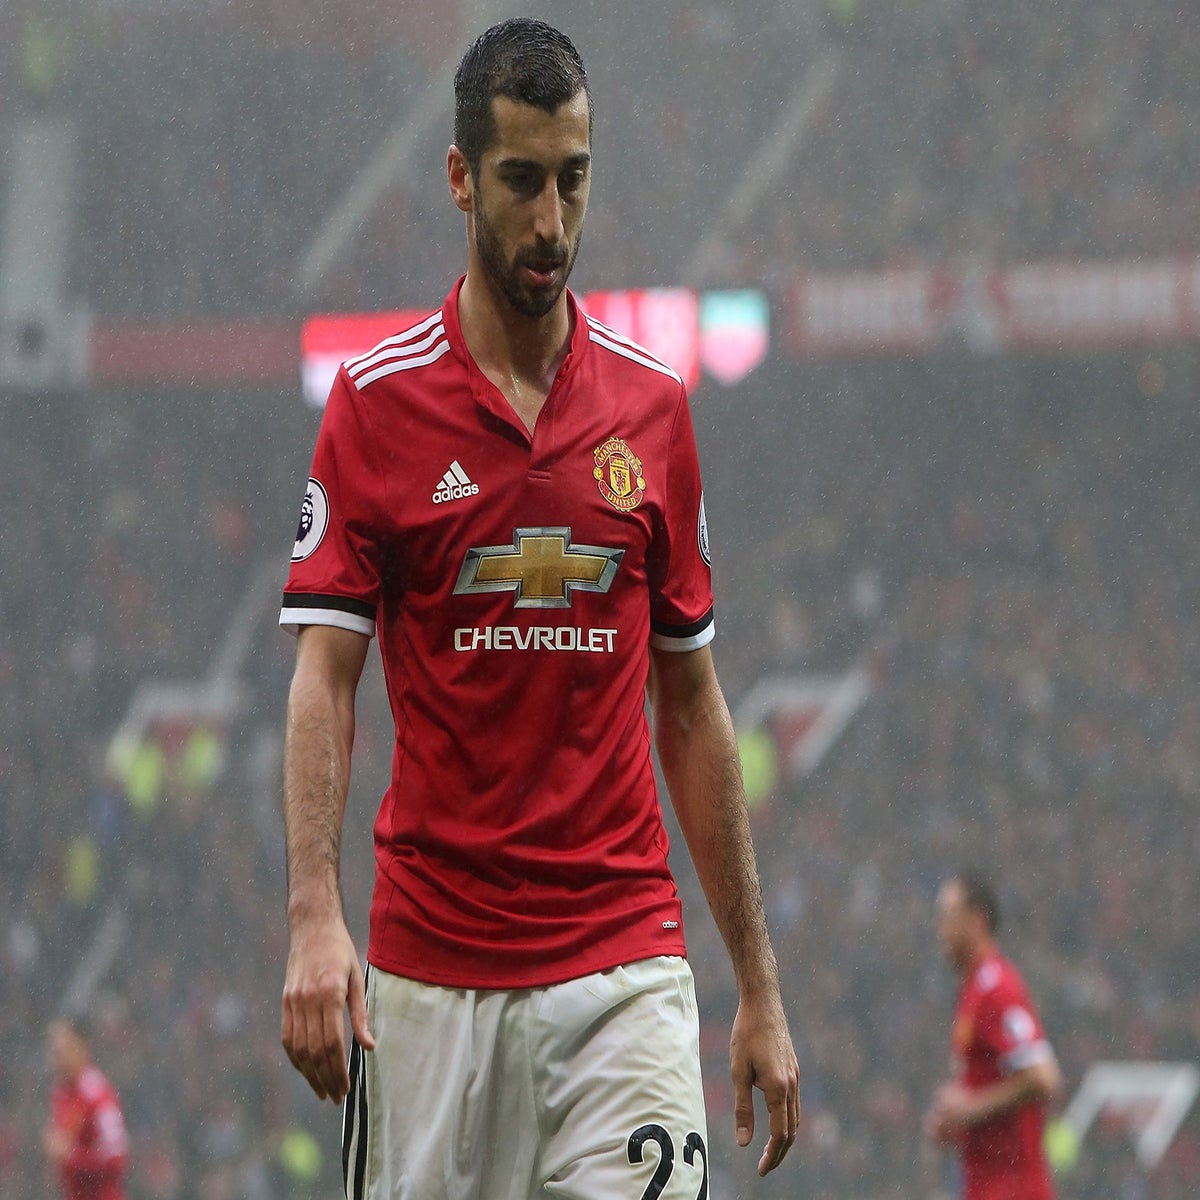 Armenia to release stamp with portrait of footballer Mkhitaryan